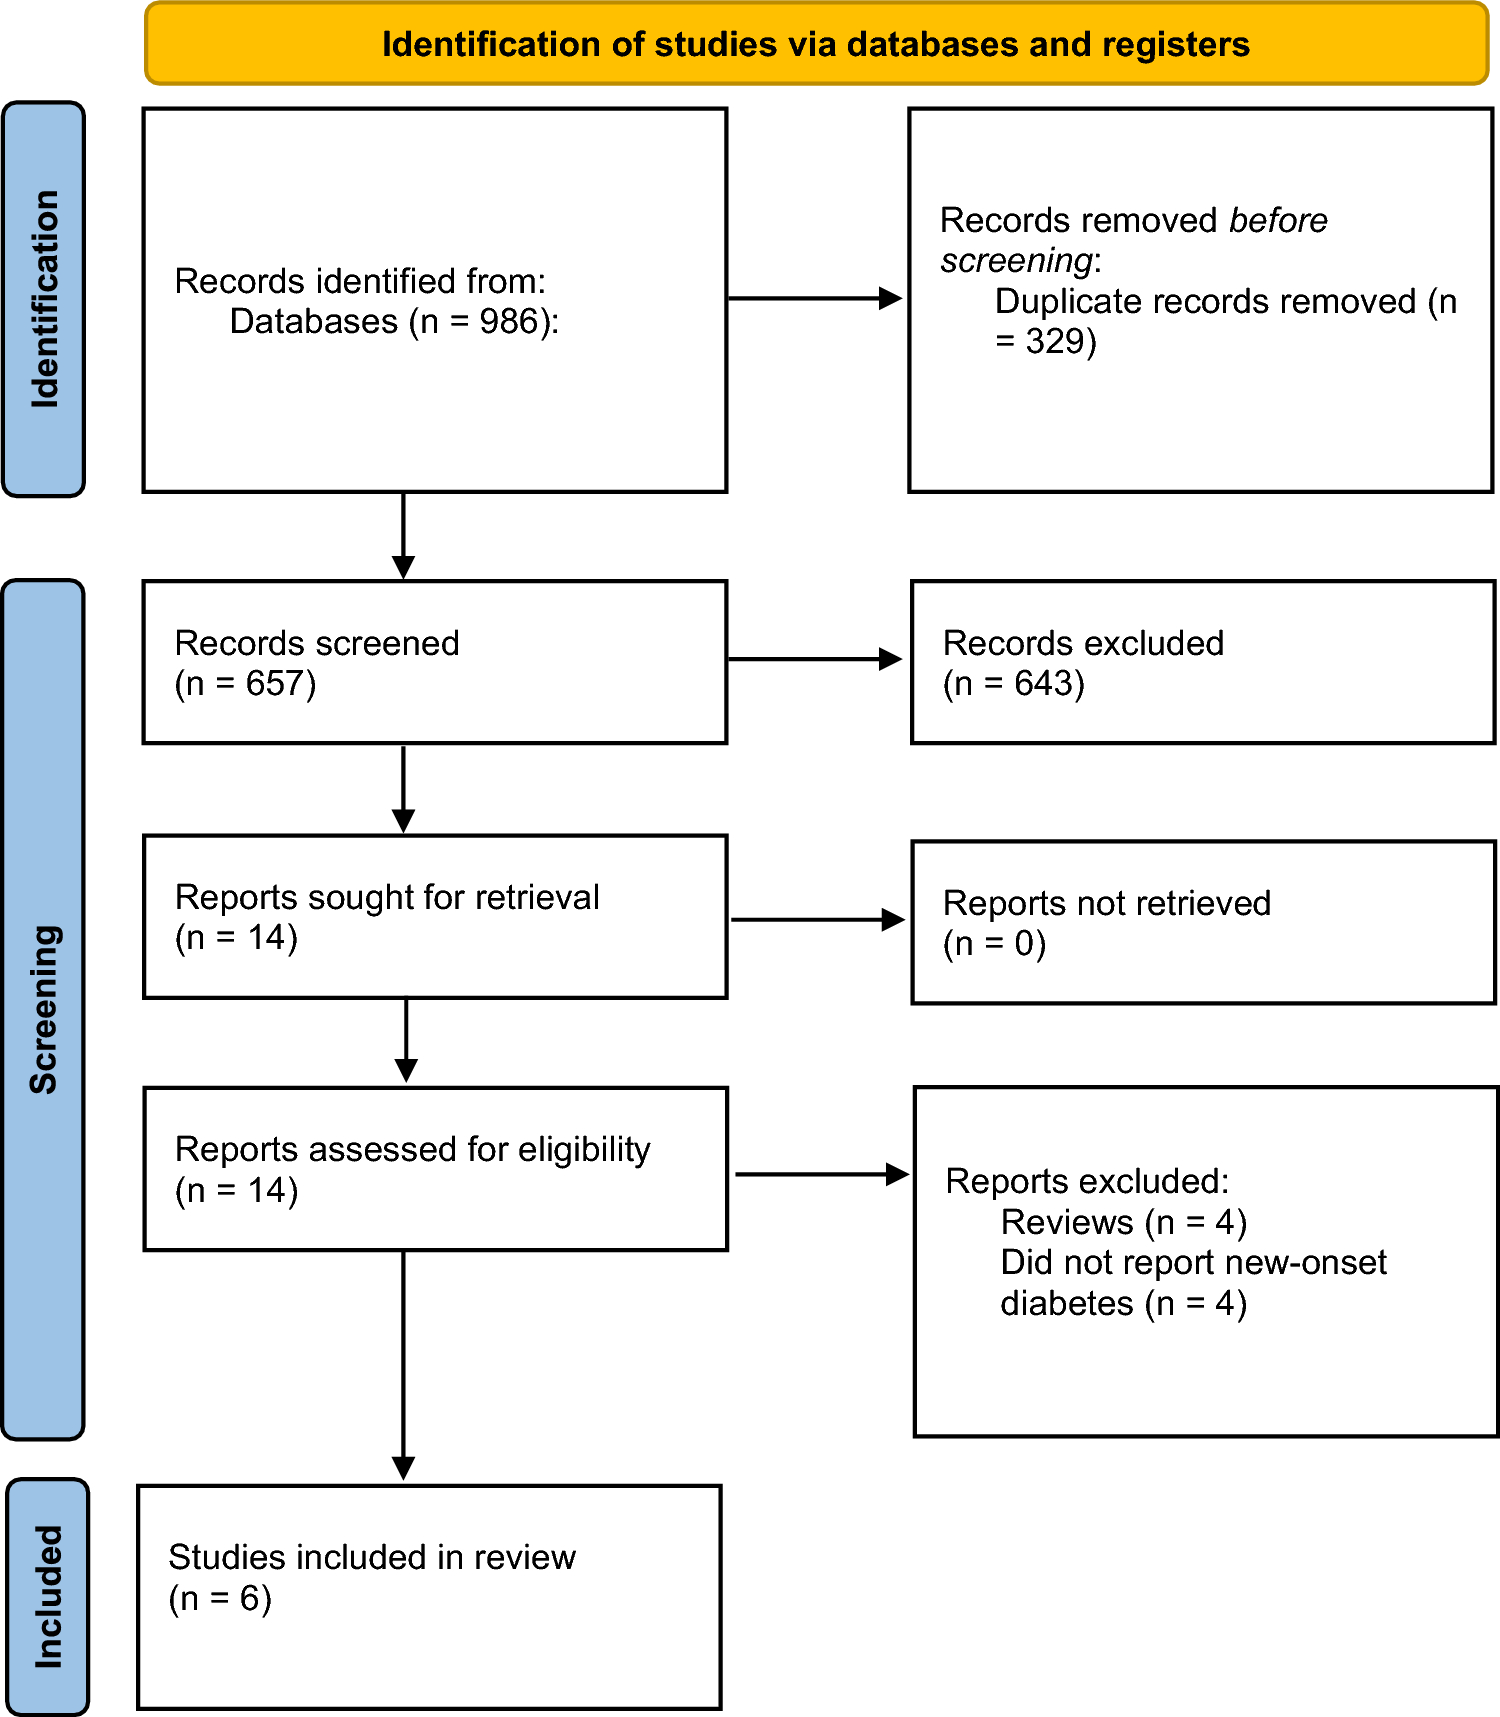 Incident diabetes in adolescents using antidepressant: a systematic review and meta-analysis